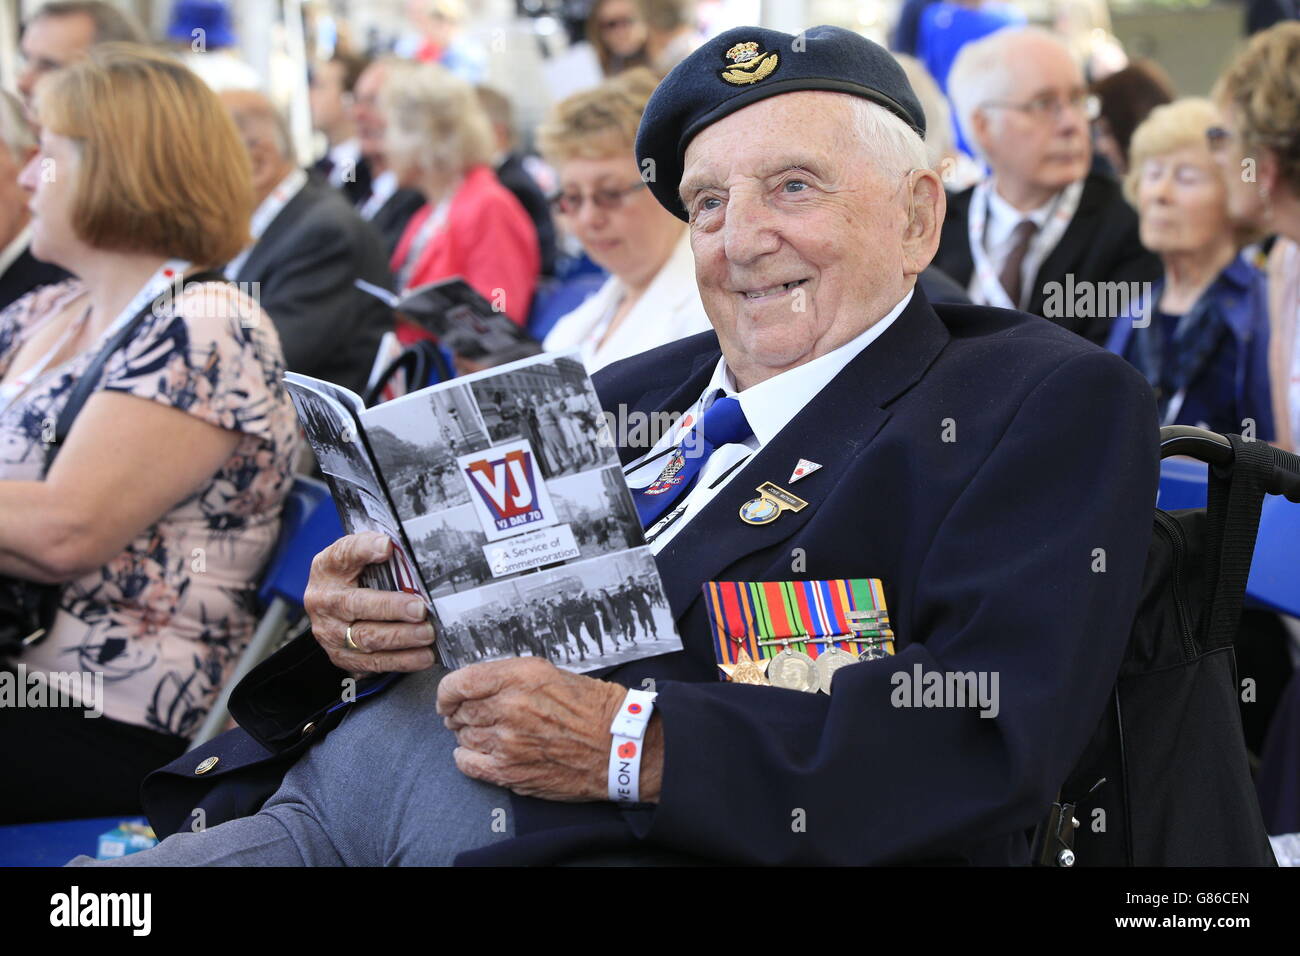 RAF veteran John Watkins, 89, from Boston, Lincolnshire, who fought with 233 Squadron, at Horse Guards Parade, London, for the National Commemoration and Drumhead Service, marking the 70th anniversary of VJ Day. Stock Photo